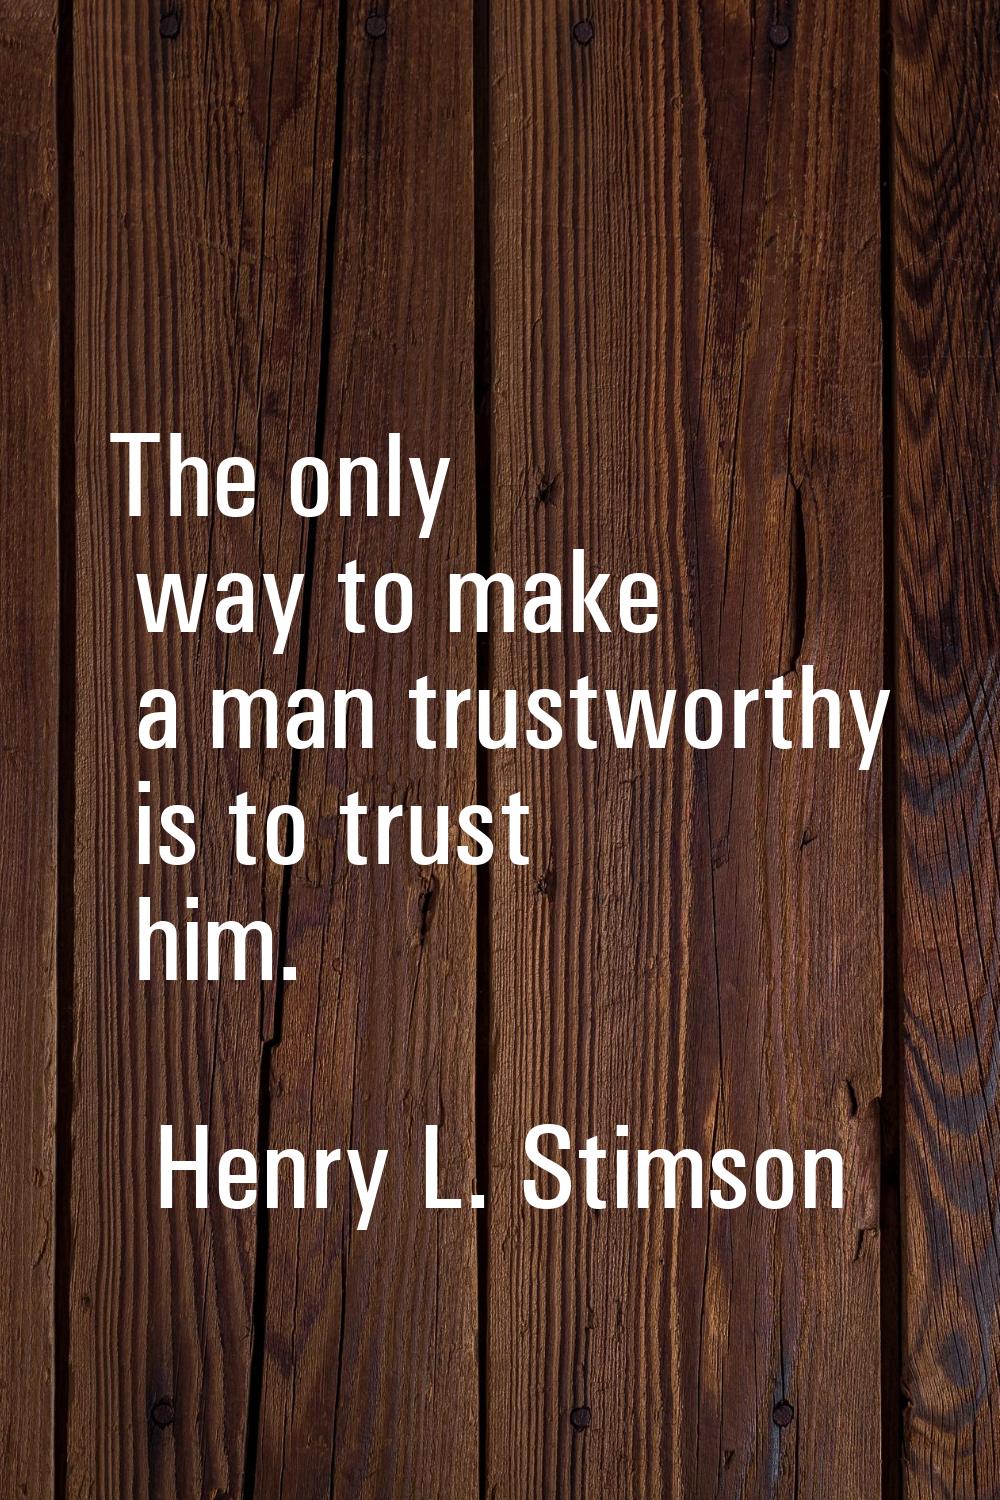 The only way to make a man trustworthy is to trust him.